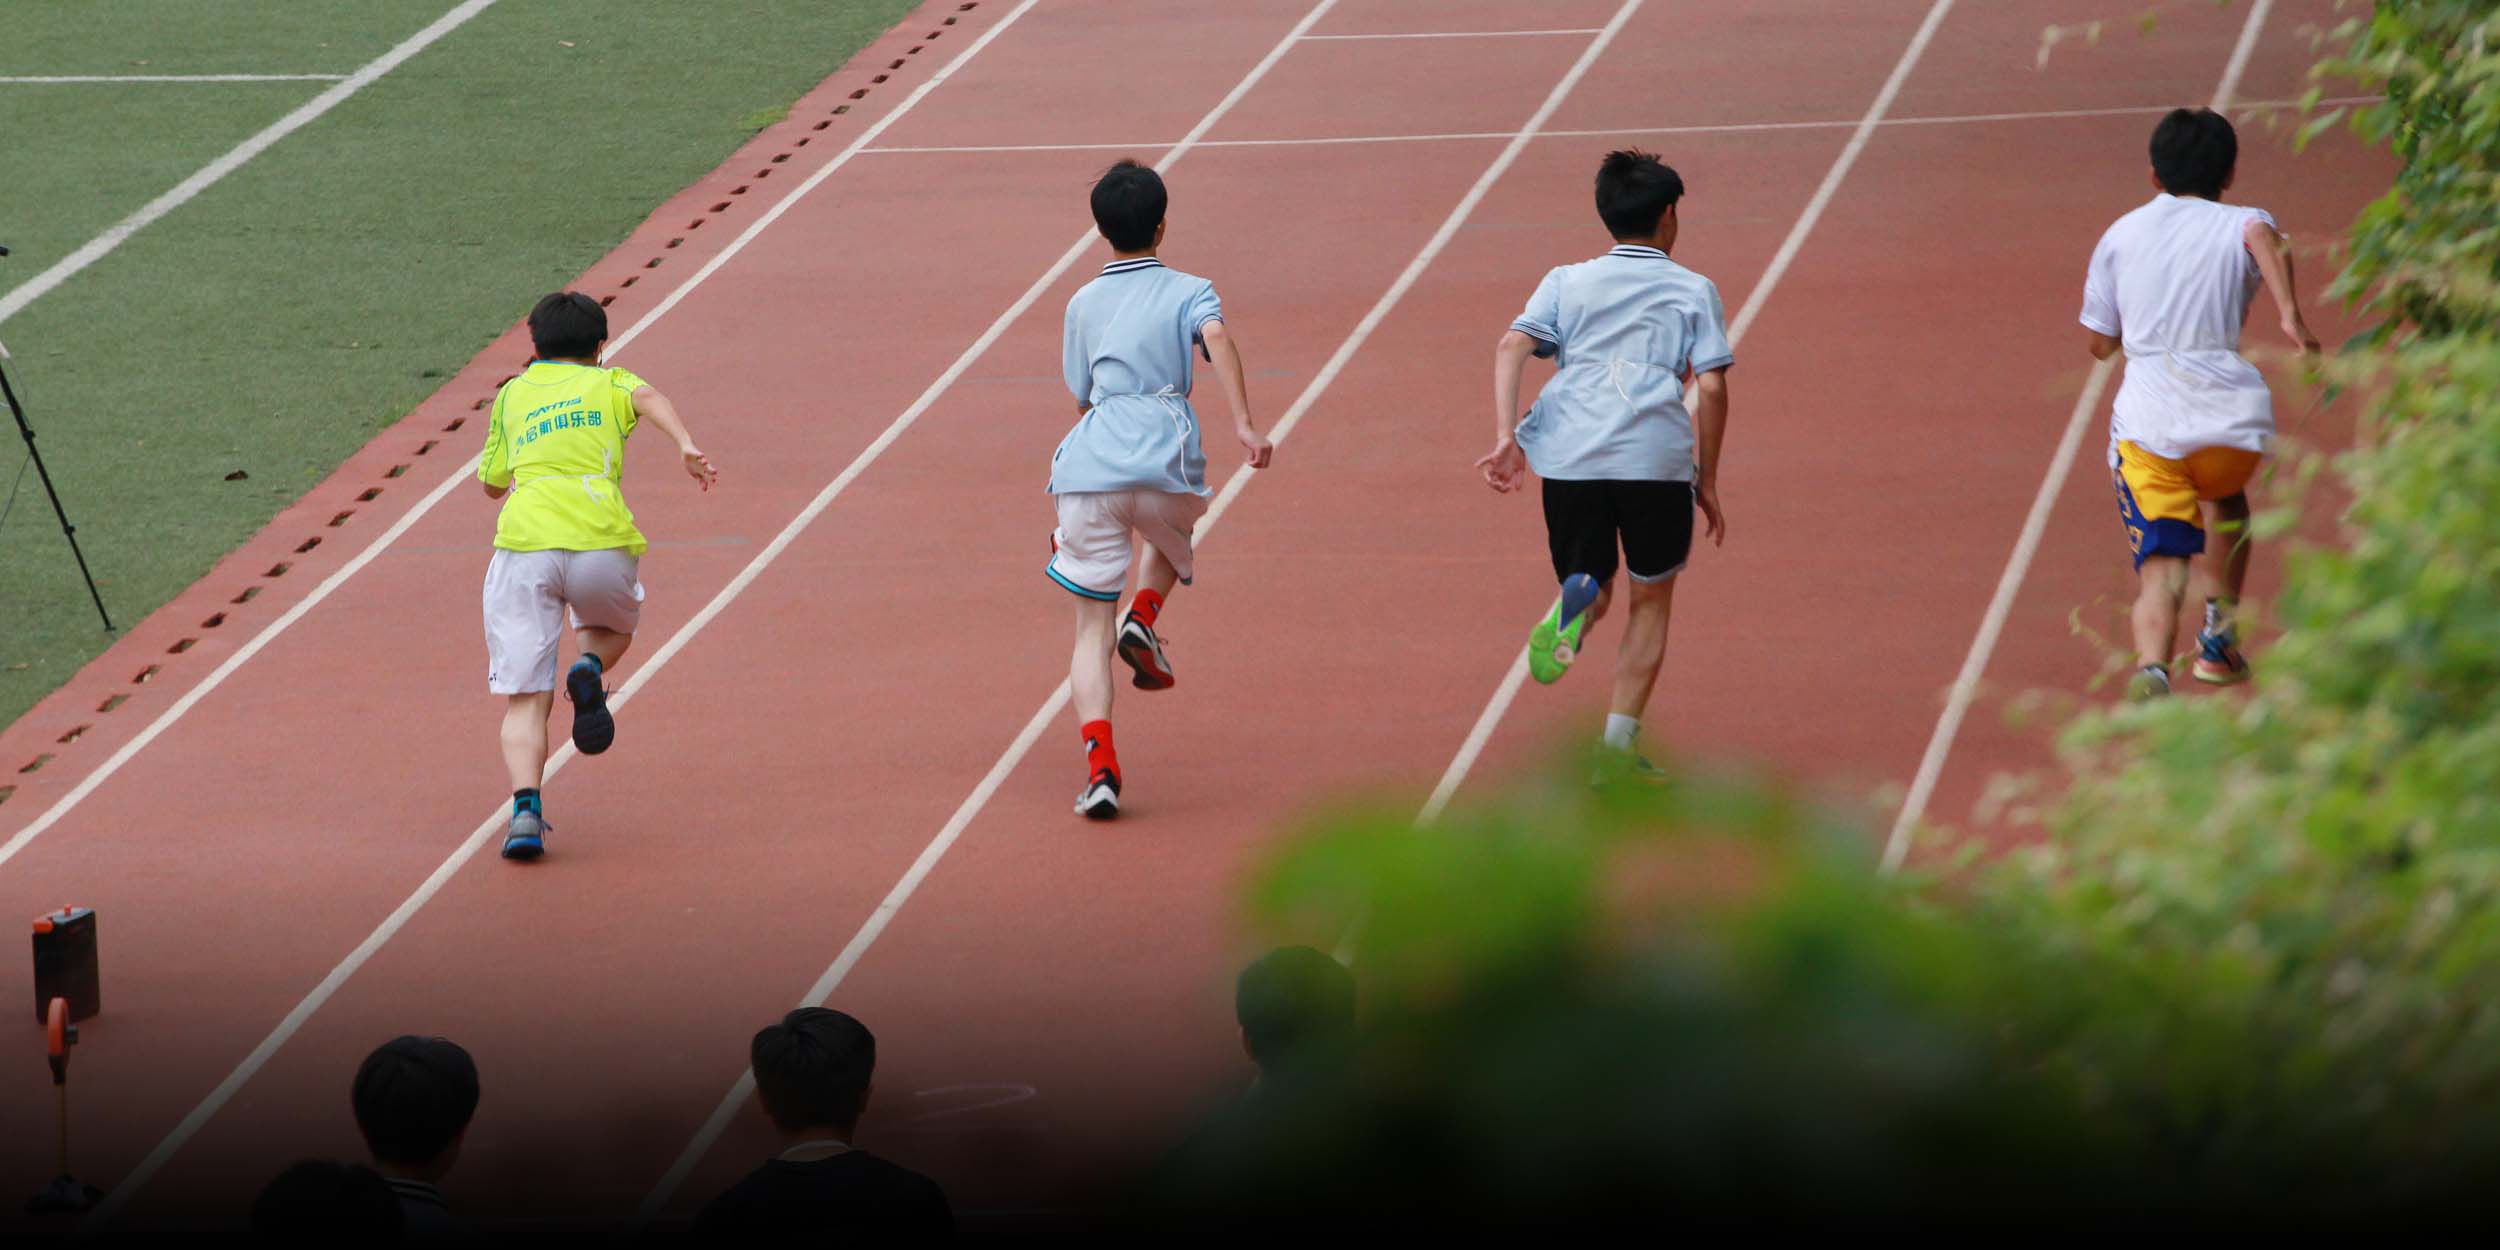 In China, Parents Turn to ‘Magic Potions’ to Help Kids Run Faster